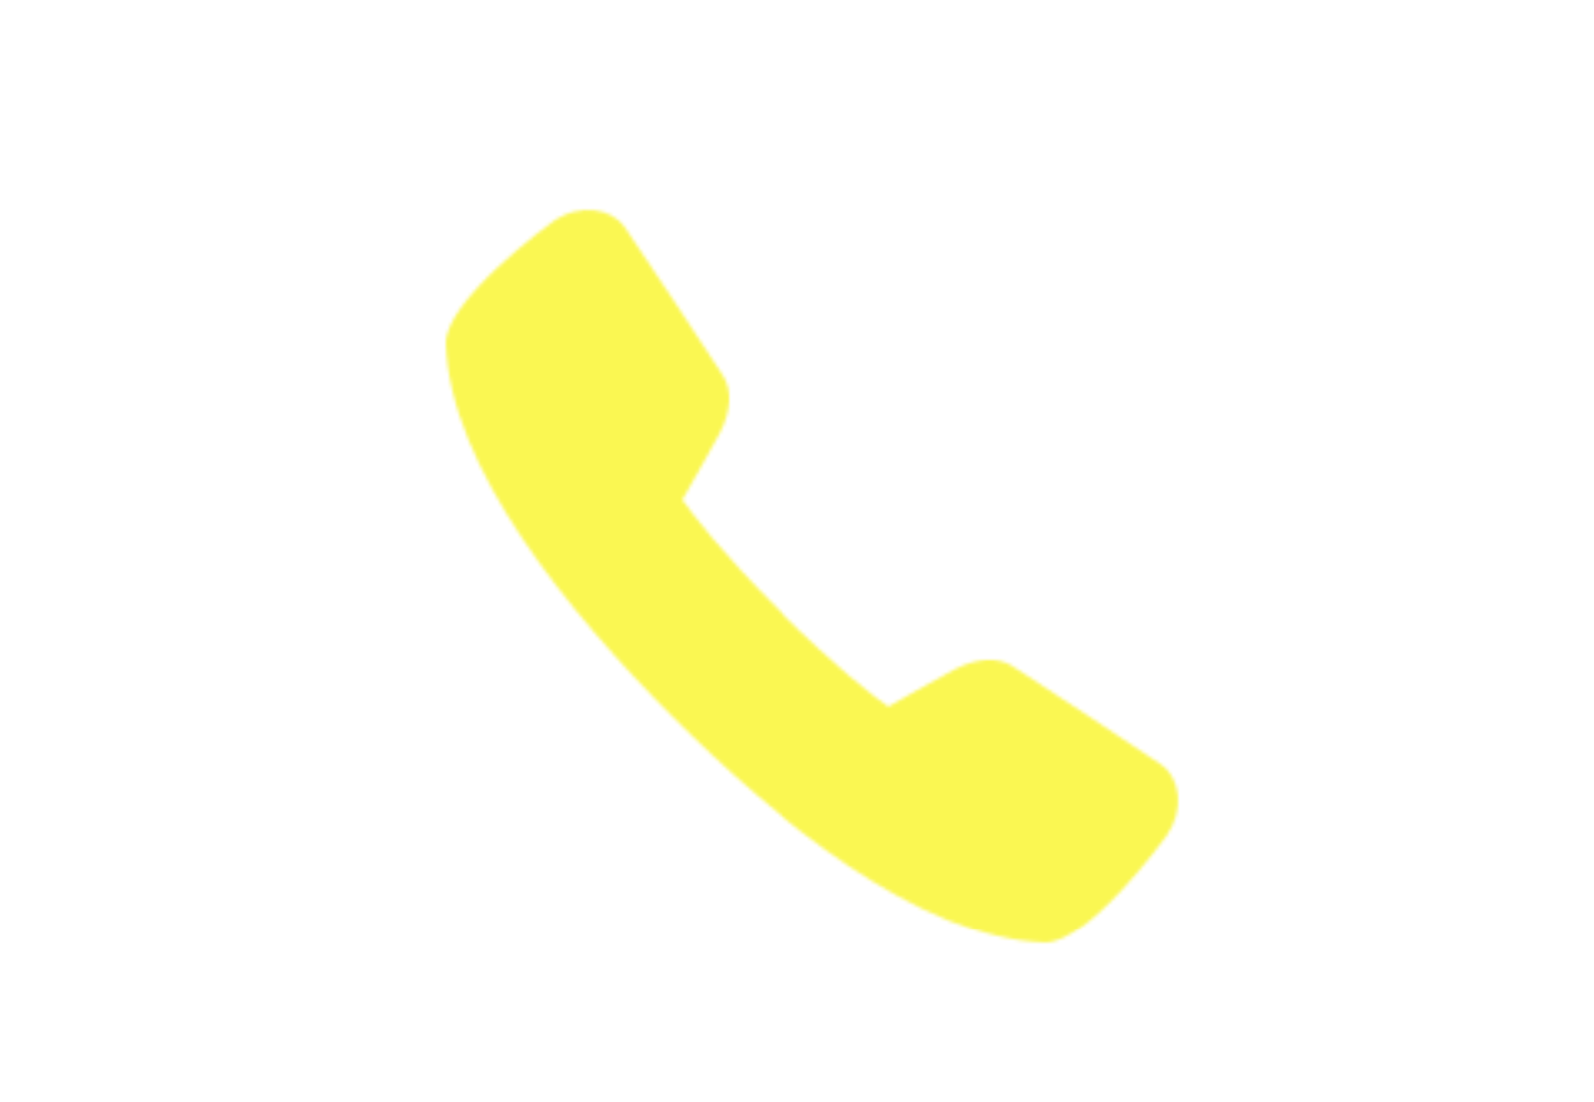 A yellow telephone symbol; our LPA Solicitors discuss business Lasting Powers of Attorney.  Complete the contact us box with your information for a call back to discuss LPAs.